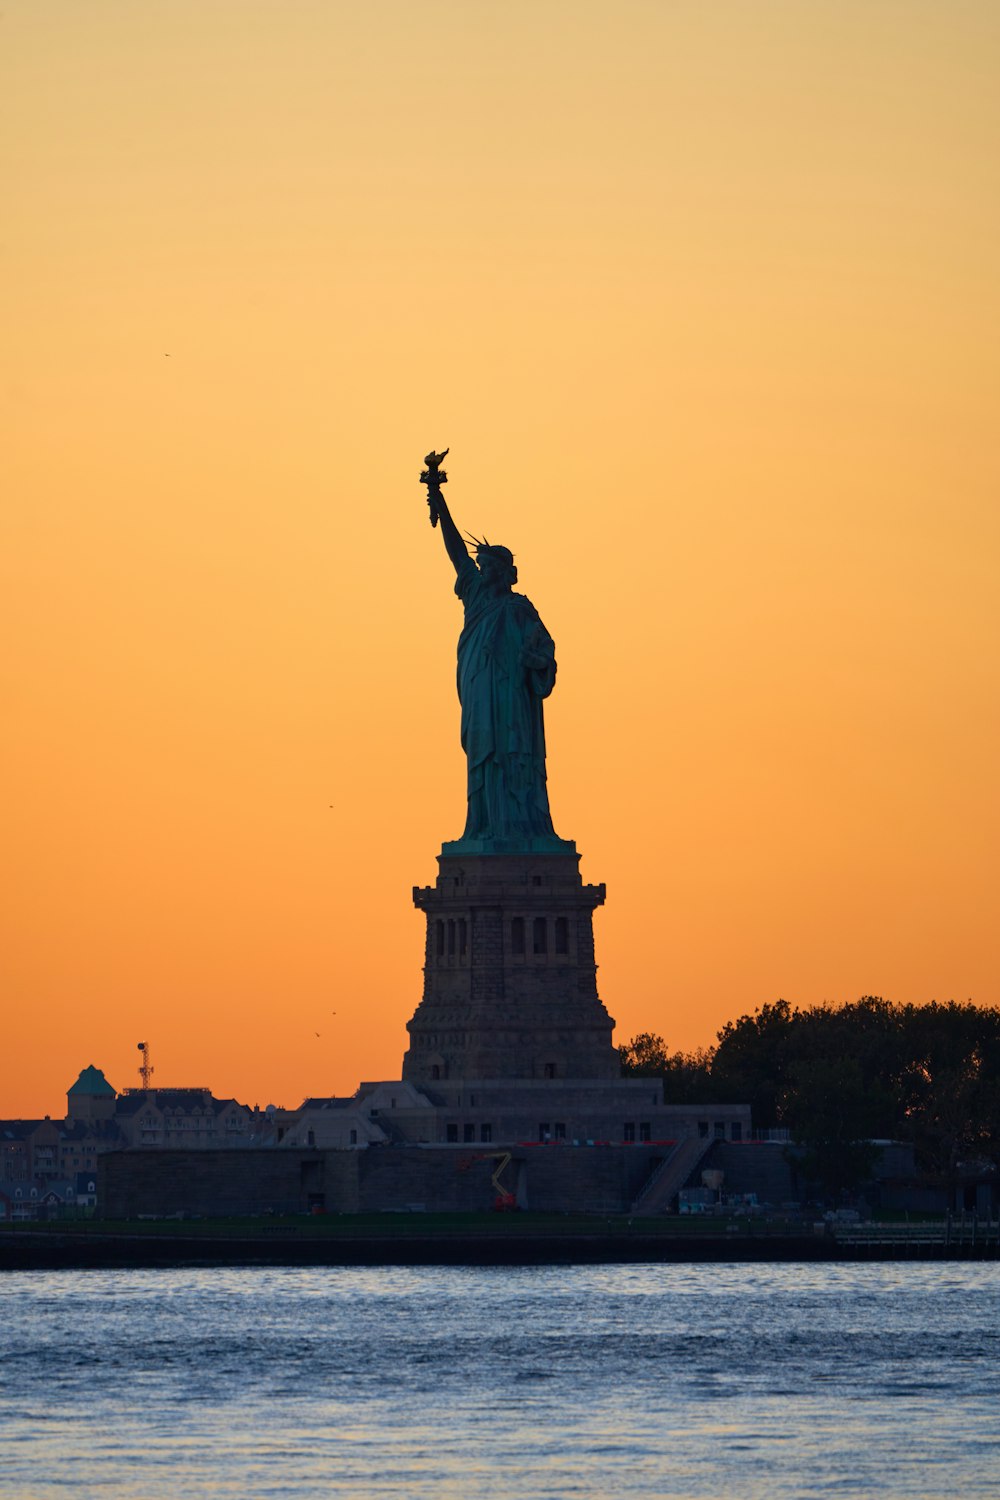 the statue of liberty is silhouetted against an orange sky